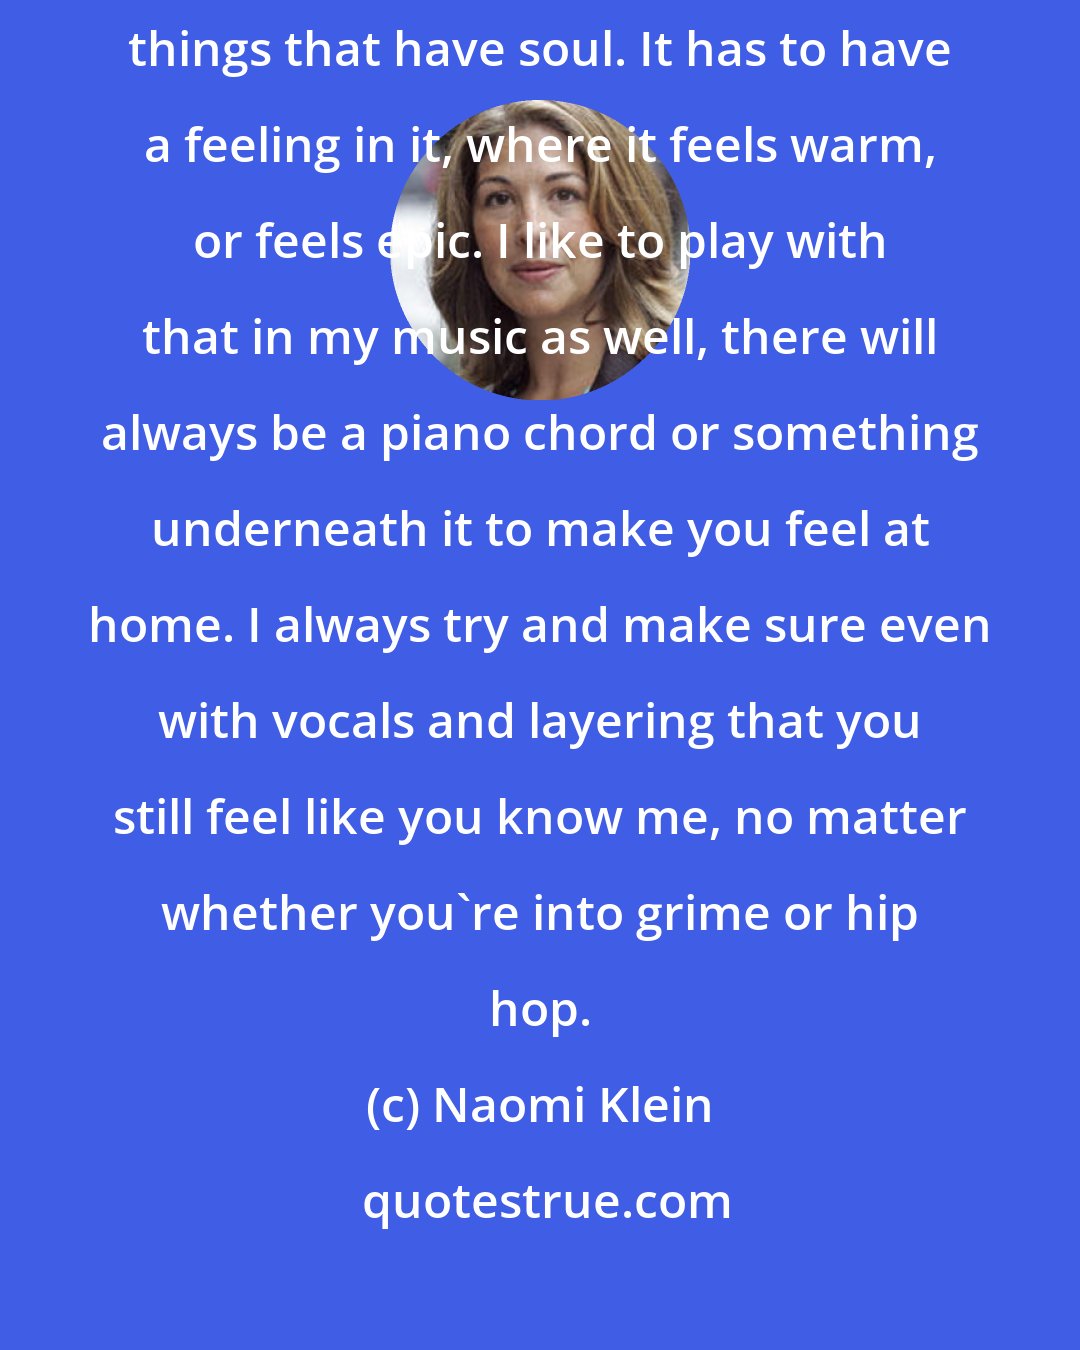 Naomi Klein: With most electronic music I hear now, the things I like will be the things that have soul. It has to have a feeling in it, where it feels warm, or feels epic. I like to play with that in my music as well, there will always be a piano chord or something underneath it to make you feel at home. I always try and make sure even with vocals and layering that you still feel like you know me, no matter whether you're into grime or hip hop.